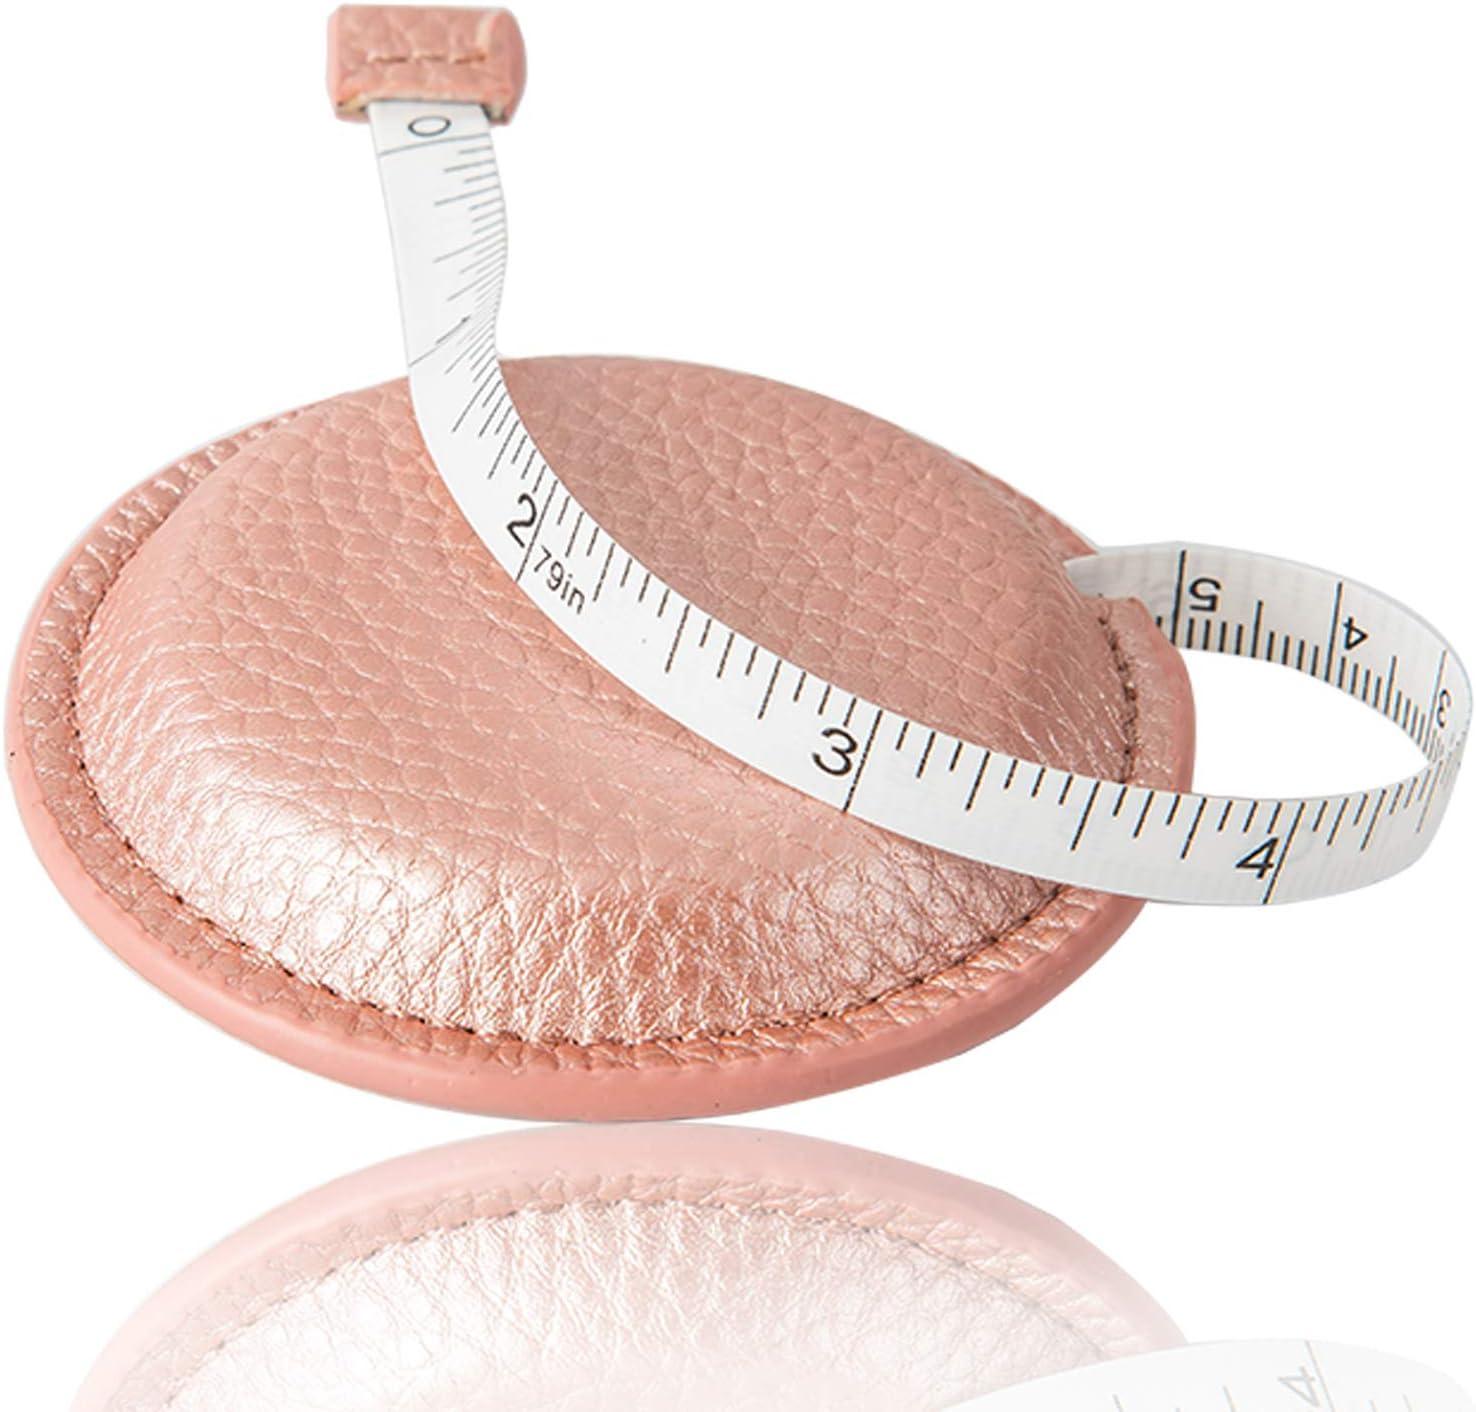 2 Pack Tape Measure for Body Measuring 79Inch/2Meters Retractable